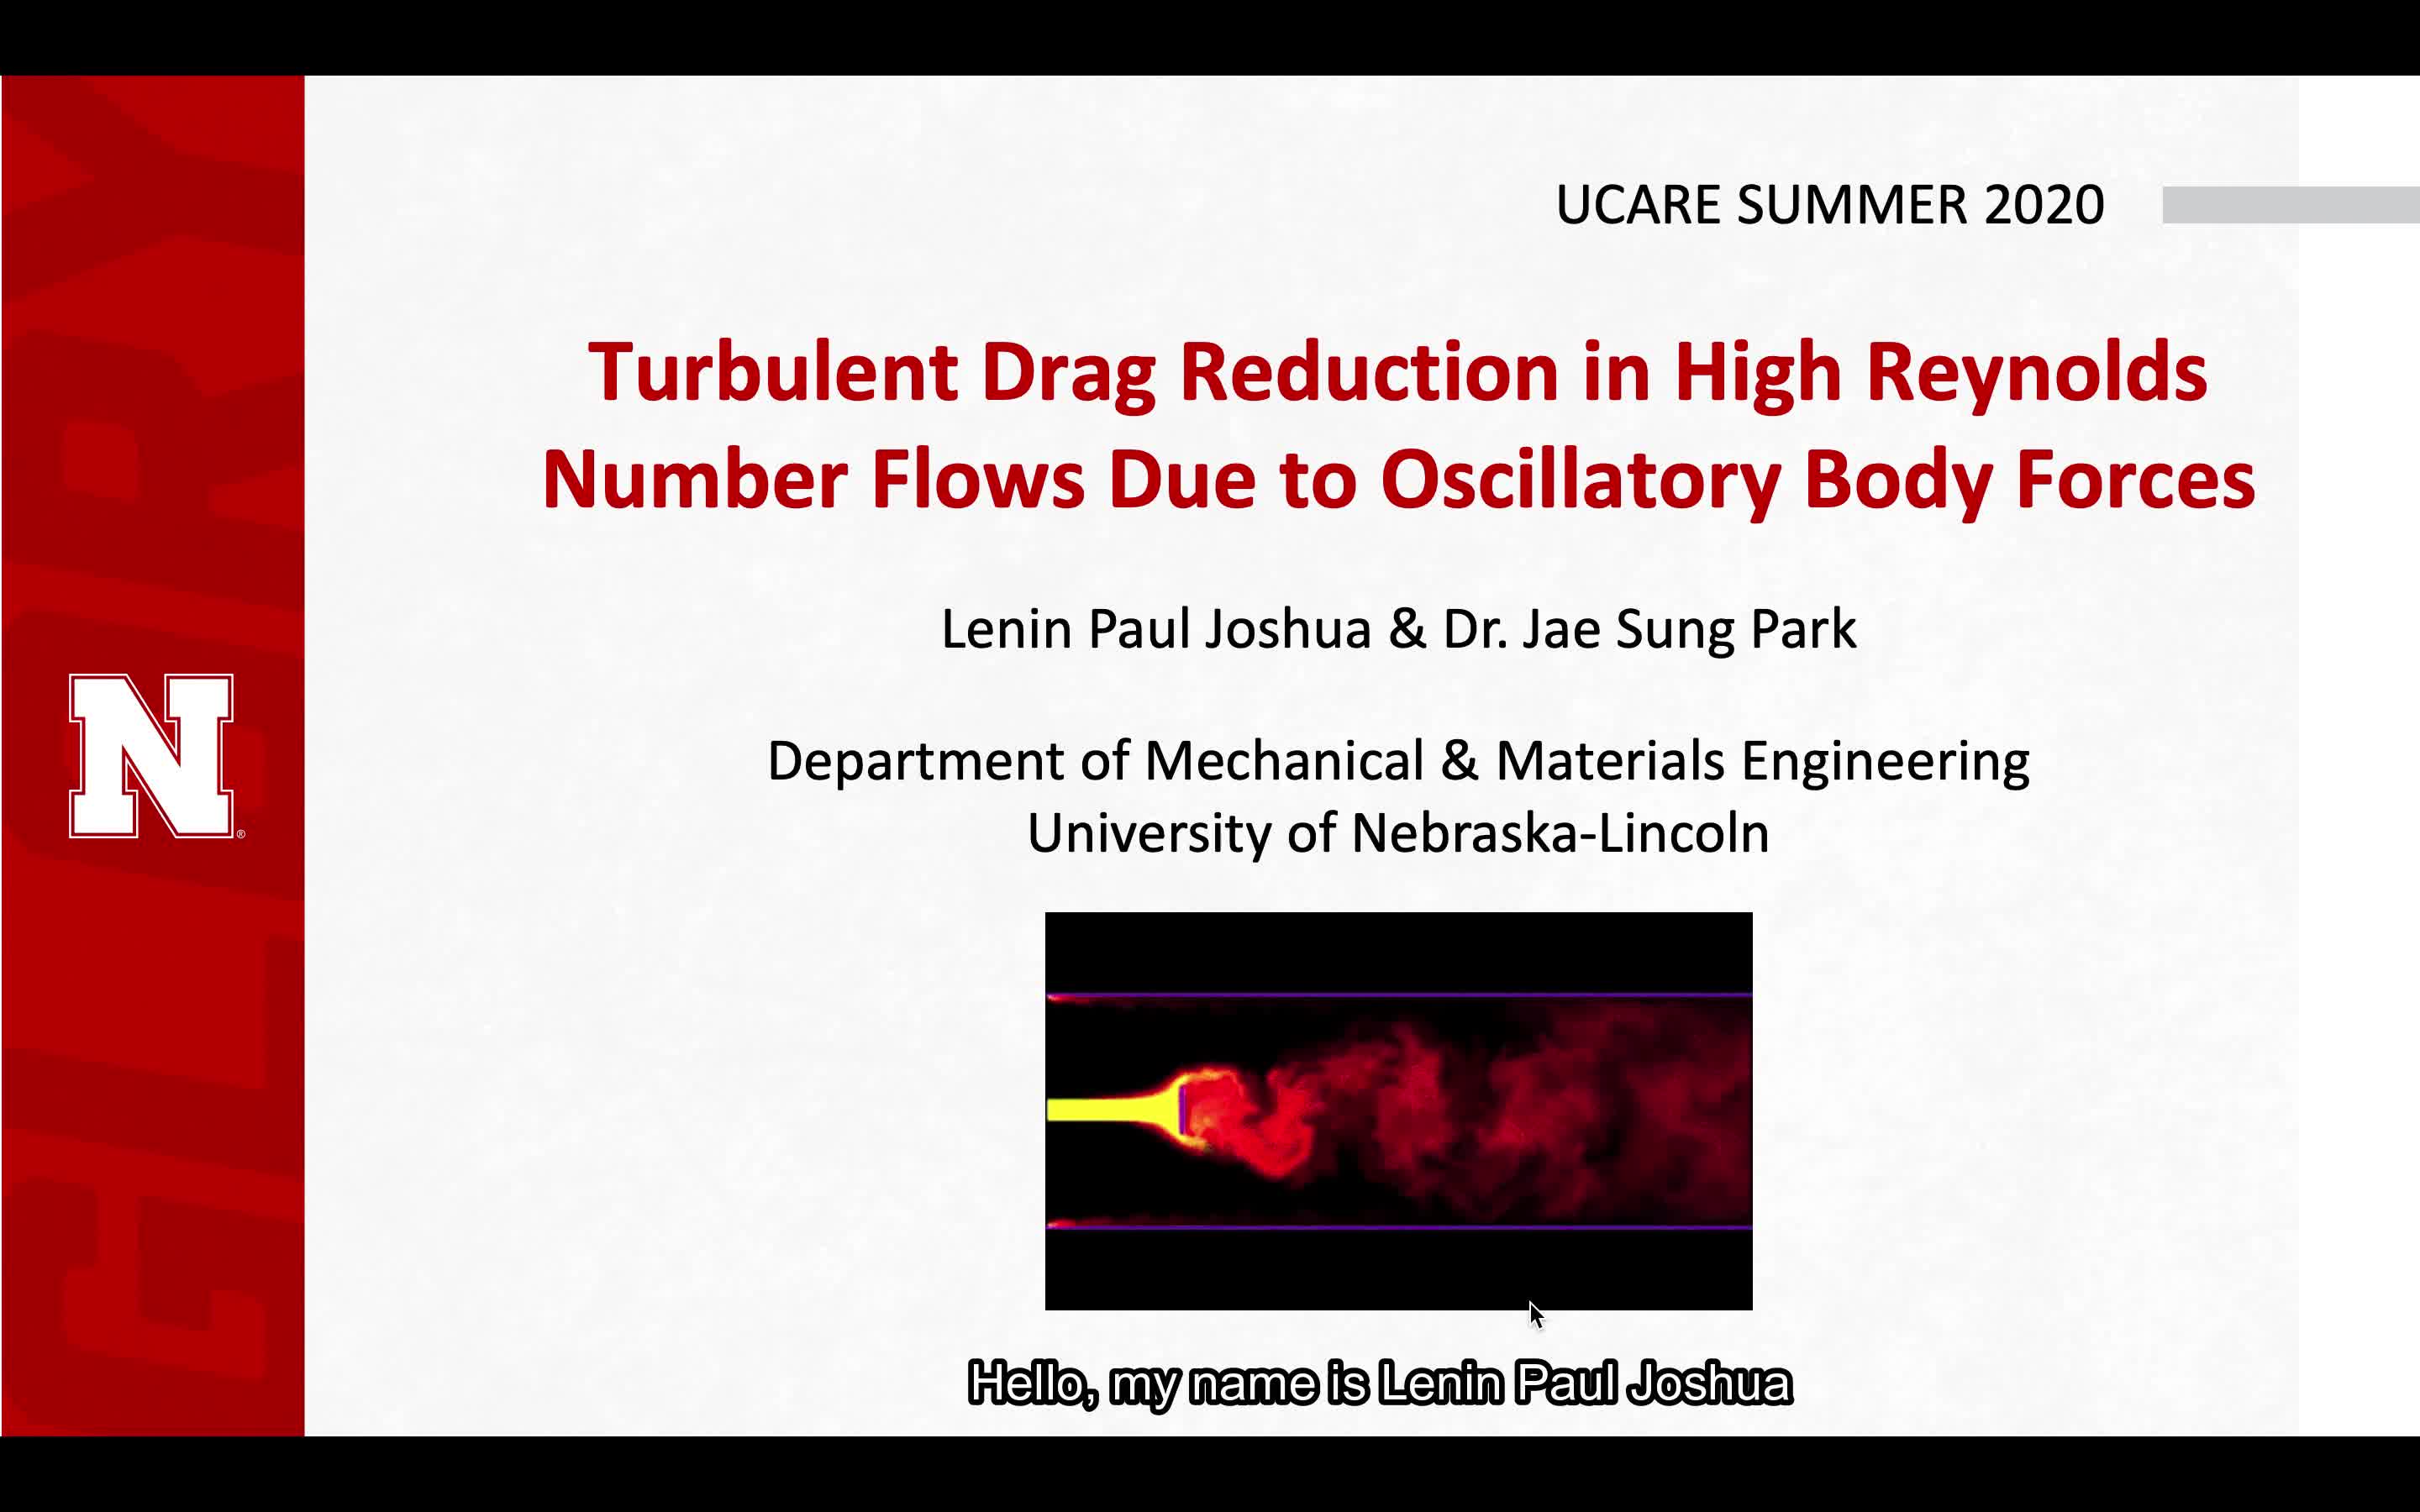 Turbulent Drag Reduction in High Reynolds Number Flows